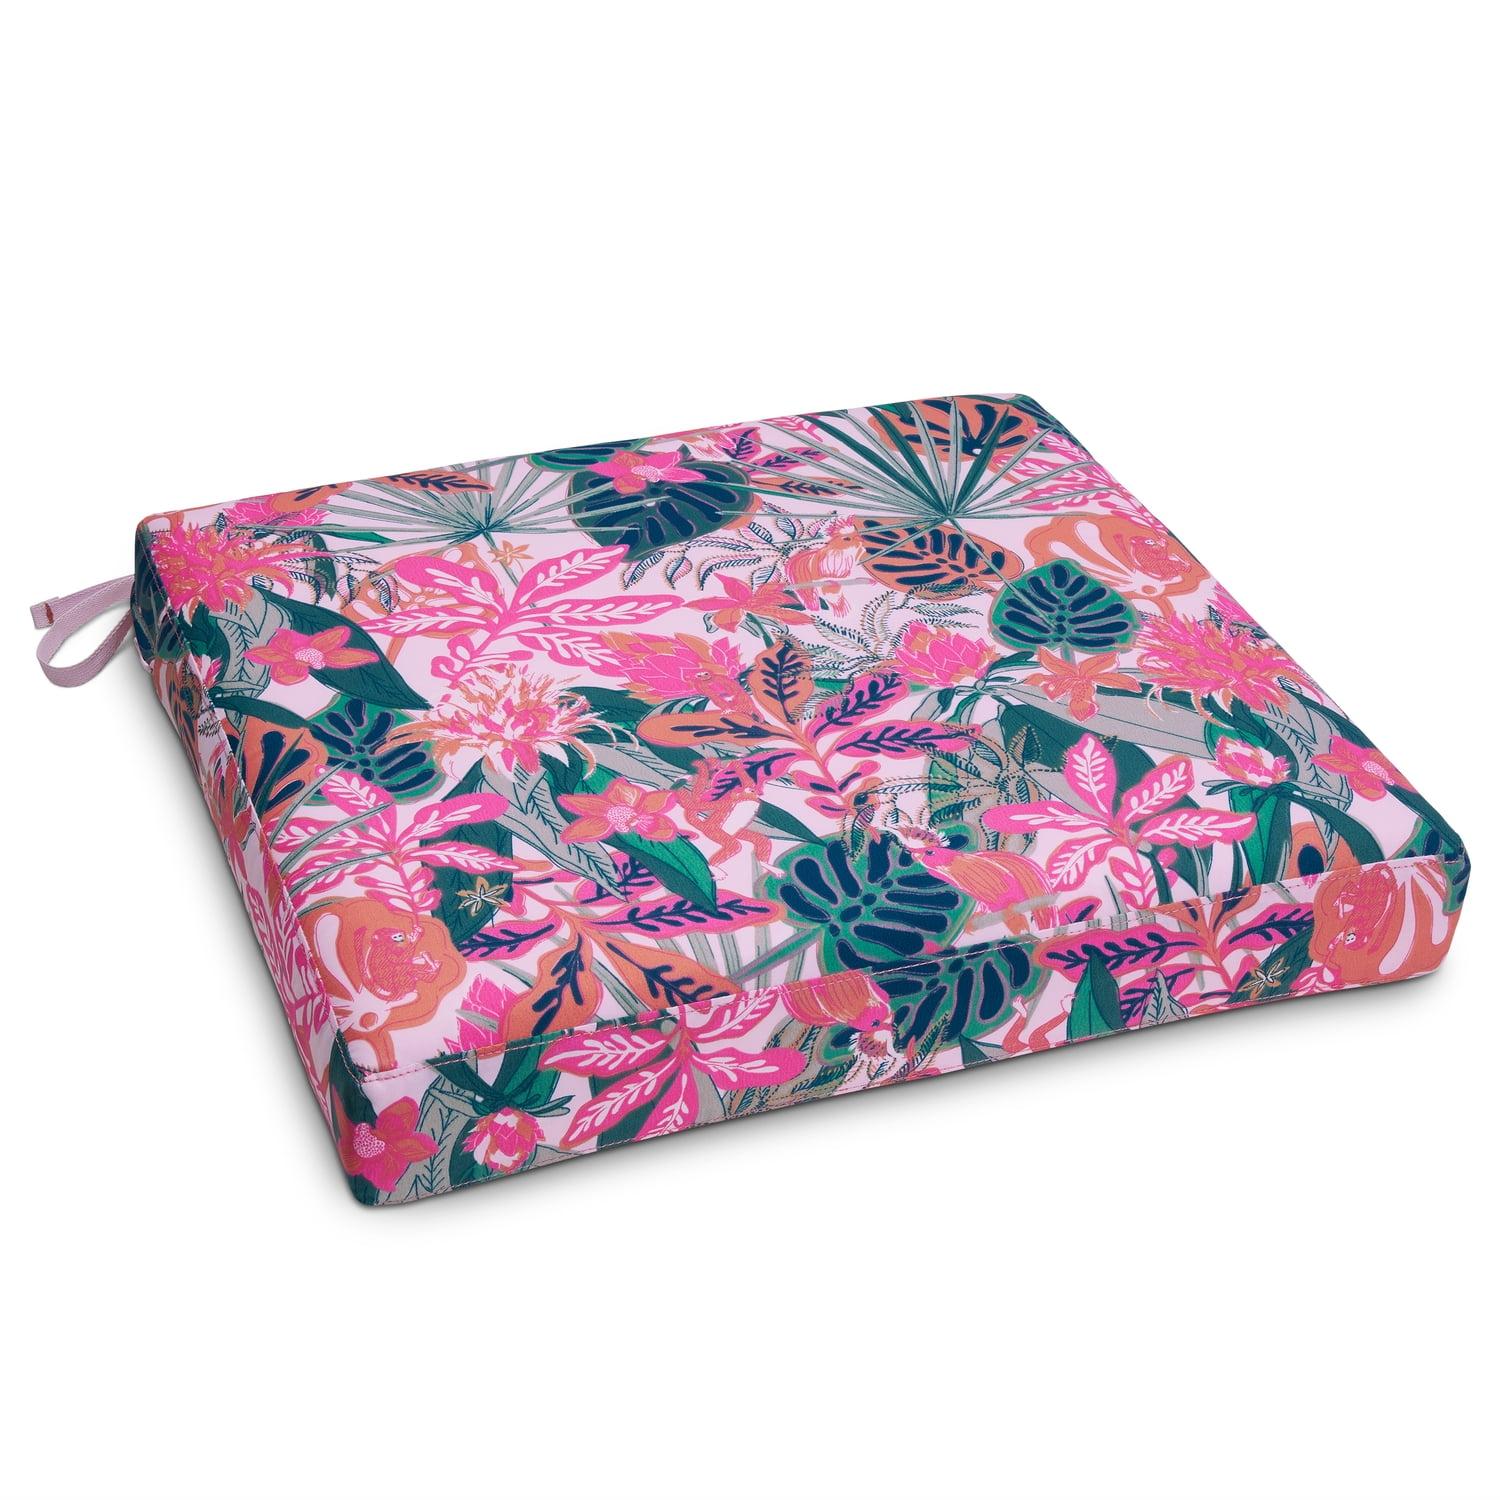 Rain Forest Canopy Coral 19" Square Outdoor Seat Cushion